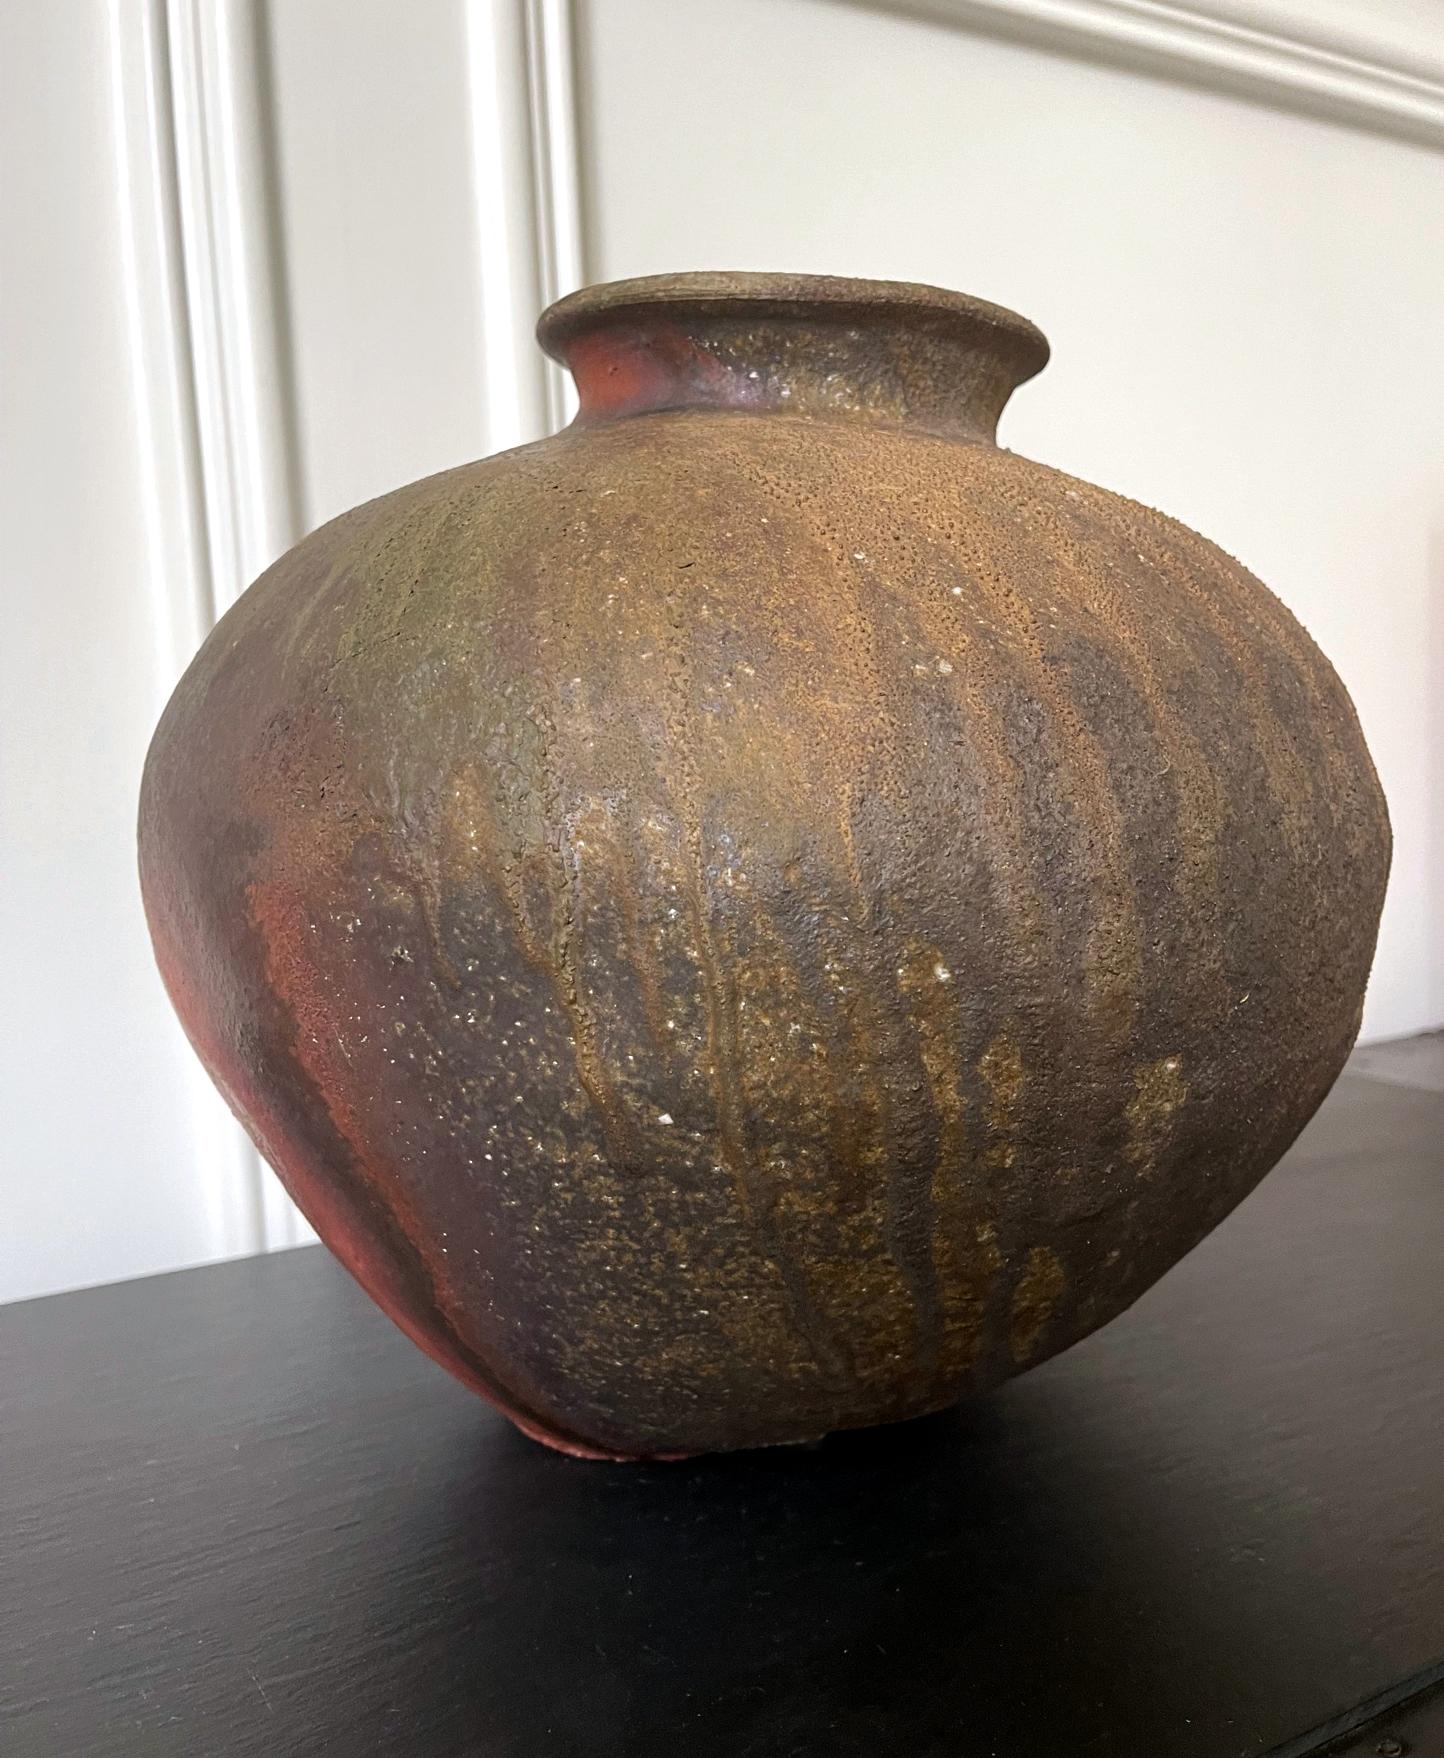 A Japanese storage jar (tsubo) made in the ancient Echizen ware tradition by Fujita Jurouemon VIII. Echizen is one of the six ancient kilns in Japan, directly influenced by the Sue ware of the Heian period. Echizen ware is fired without applied